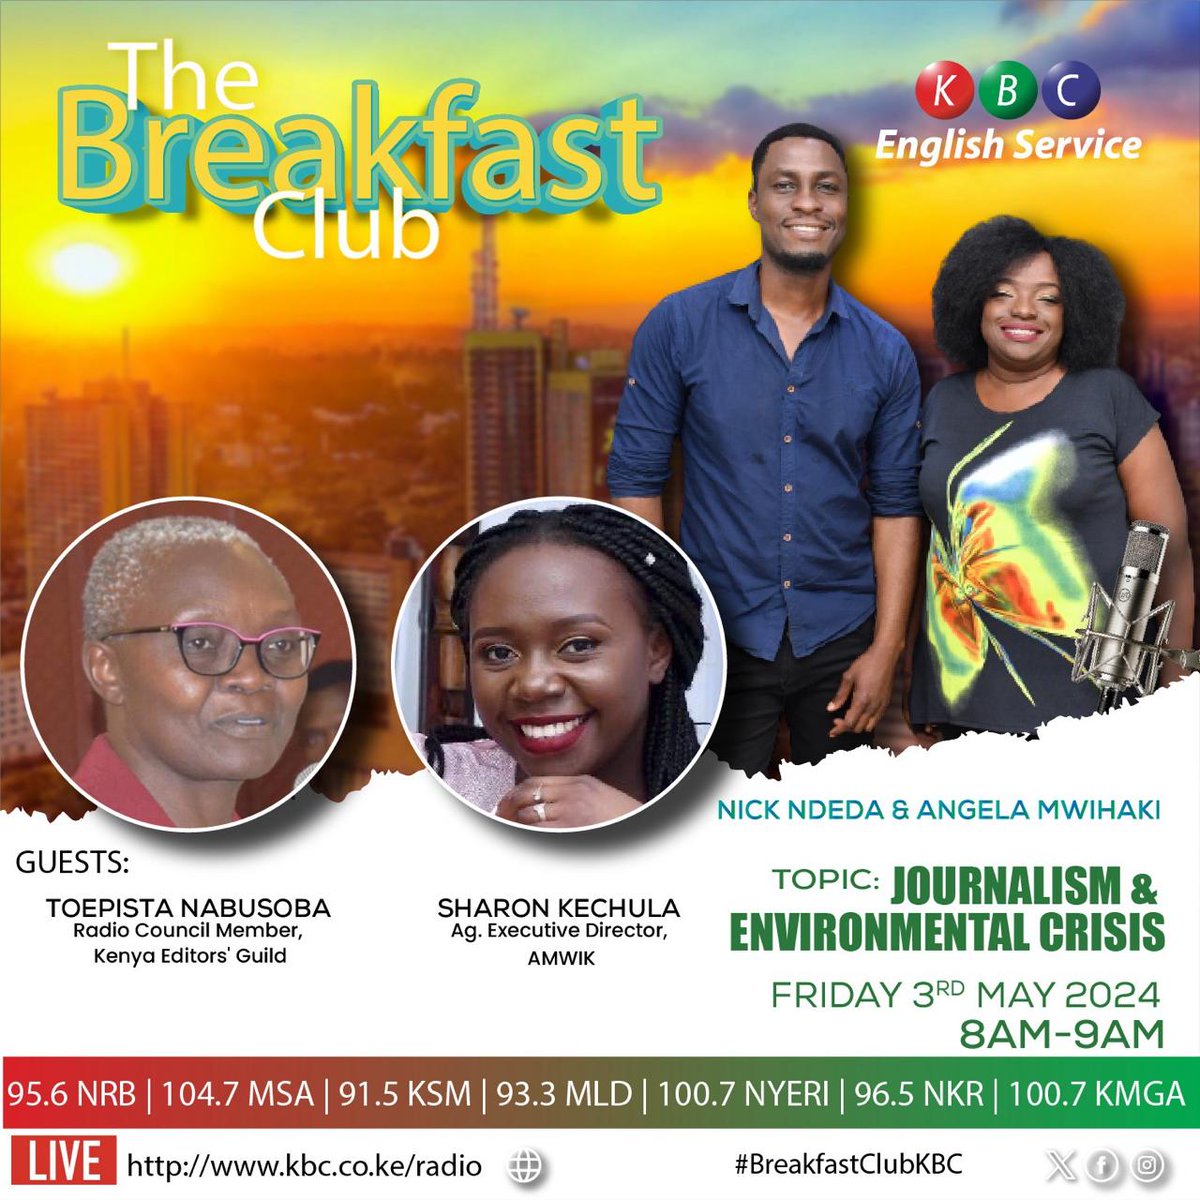 Tune in to the #BreakfastClubKBC today from 8.00 am to 9.00 am as KEG council member Toepista Nabusoba speaks on Journalism and Environmental crisis. @NickNdeda @angelamwihaki #WPFD2024